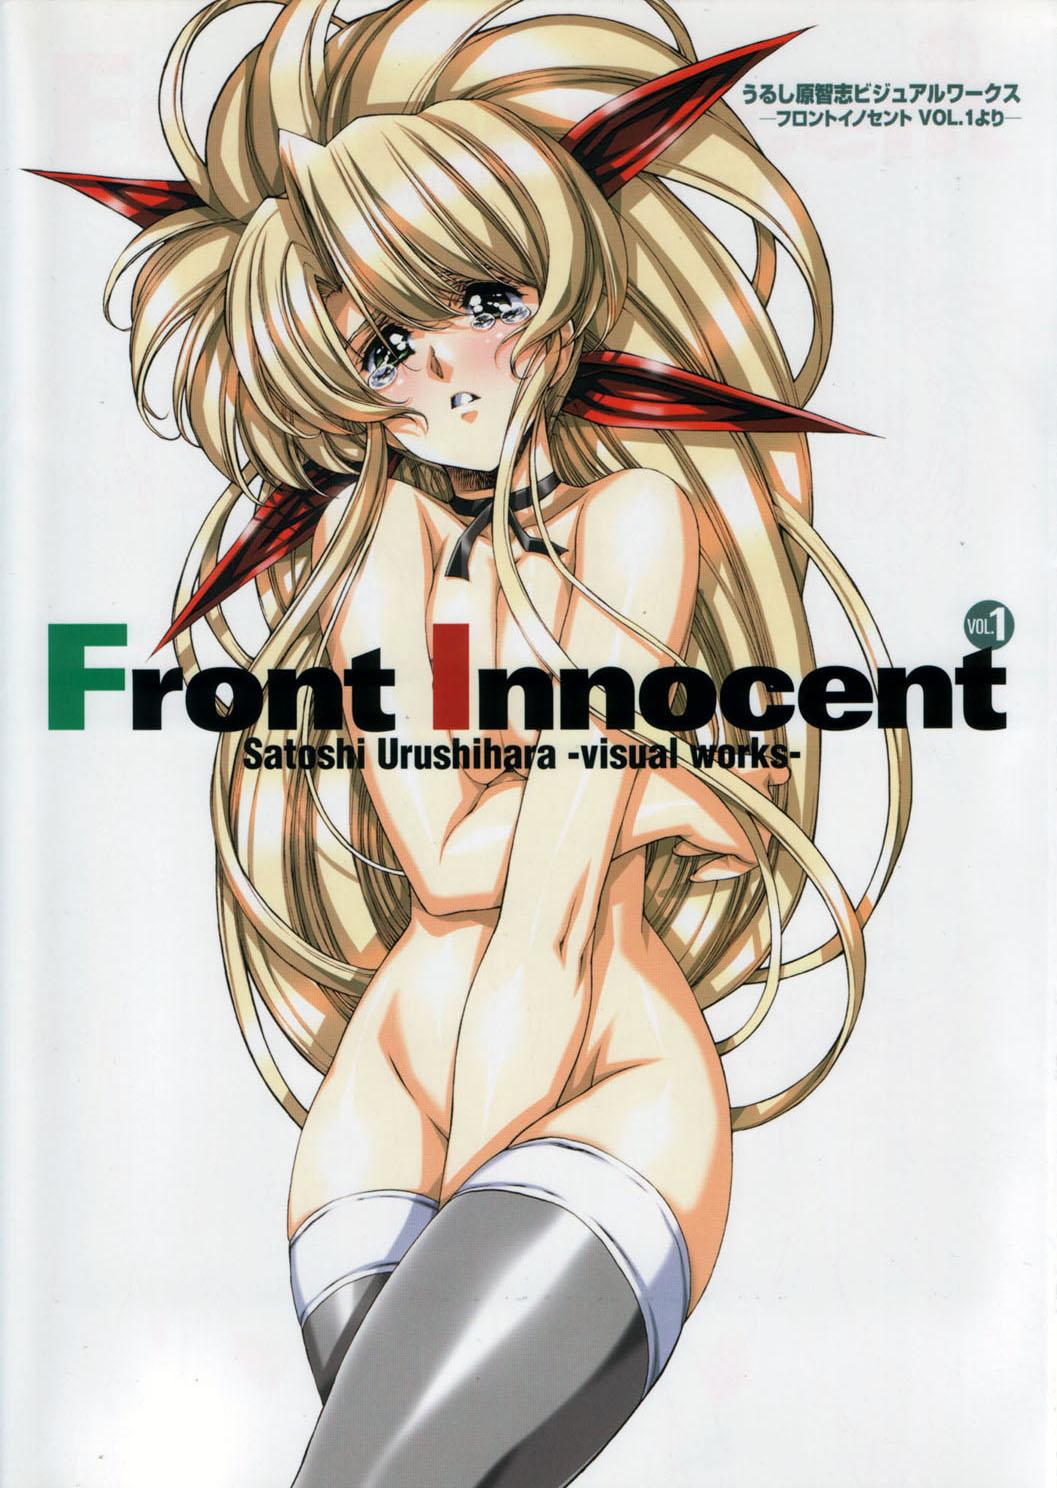 Milf Sex Front Innocent #1: Satoshi Urushihara Visual Works - Another lady innocent Turkish - Page 2